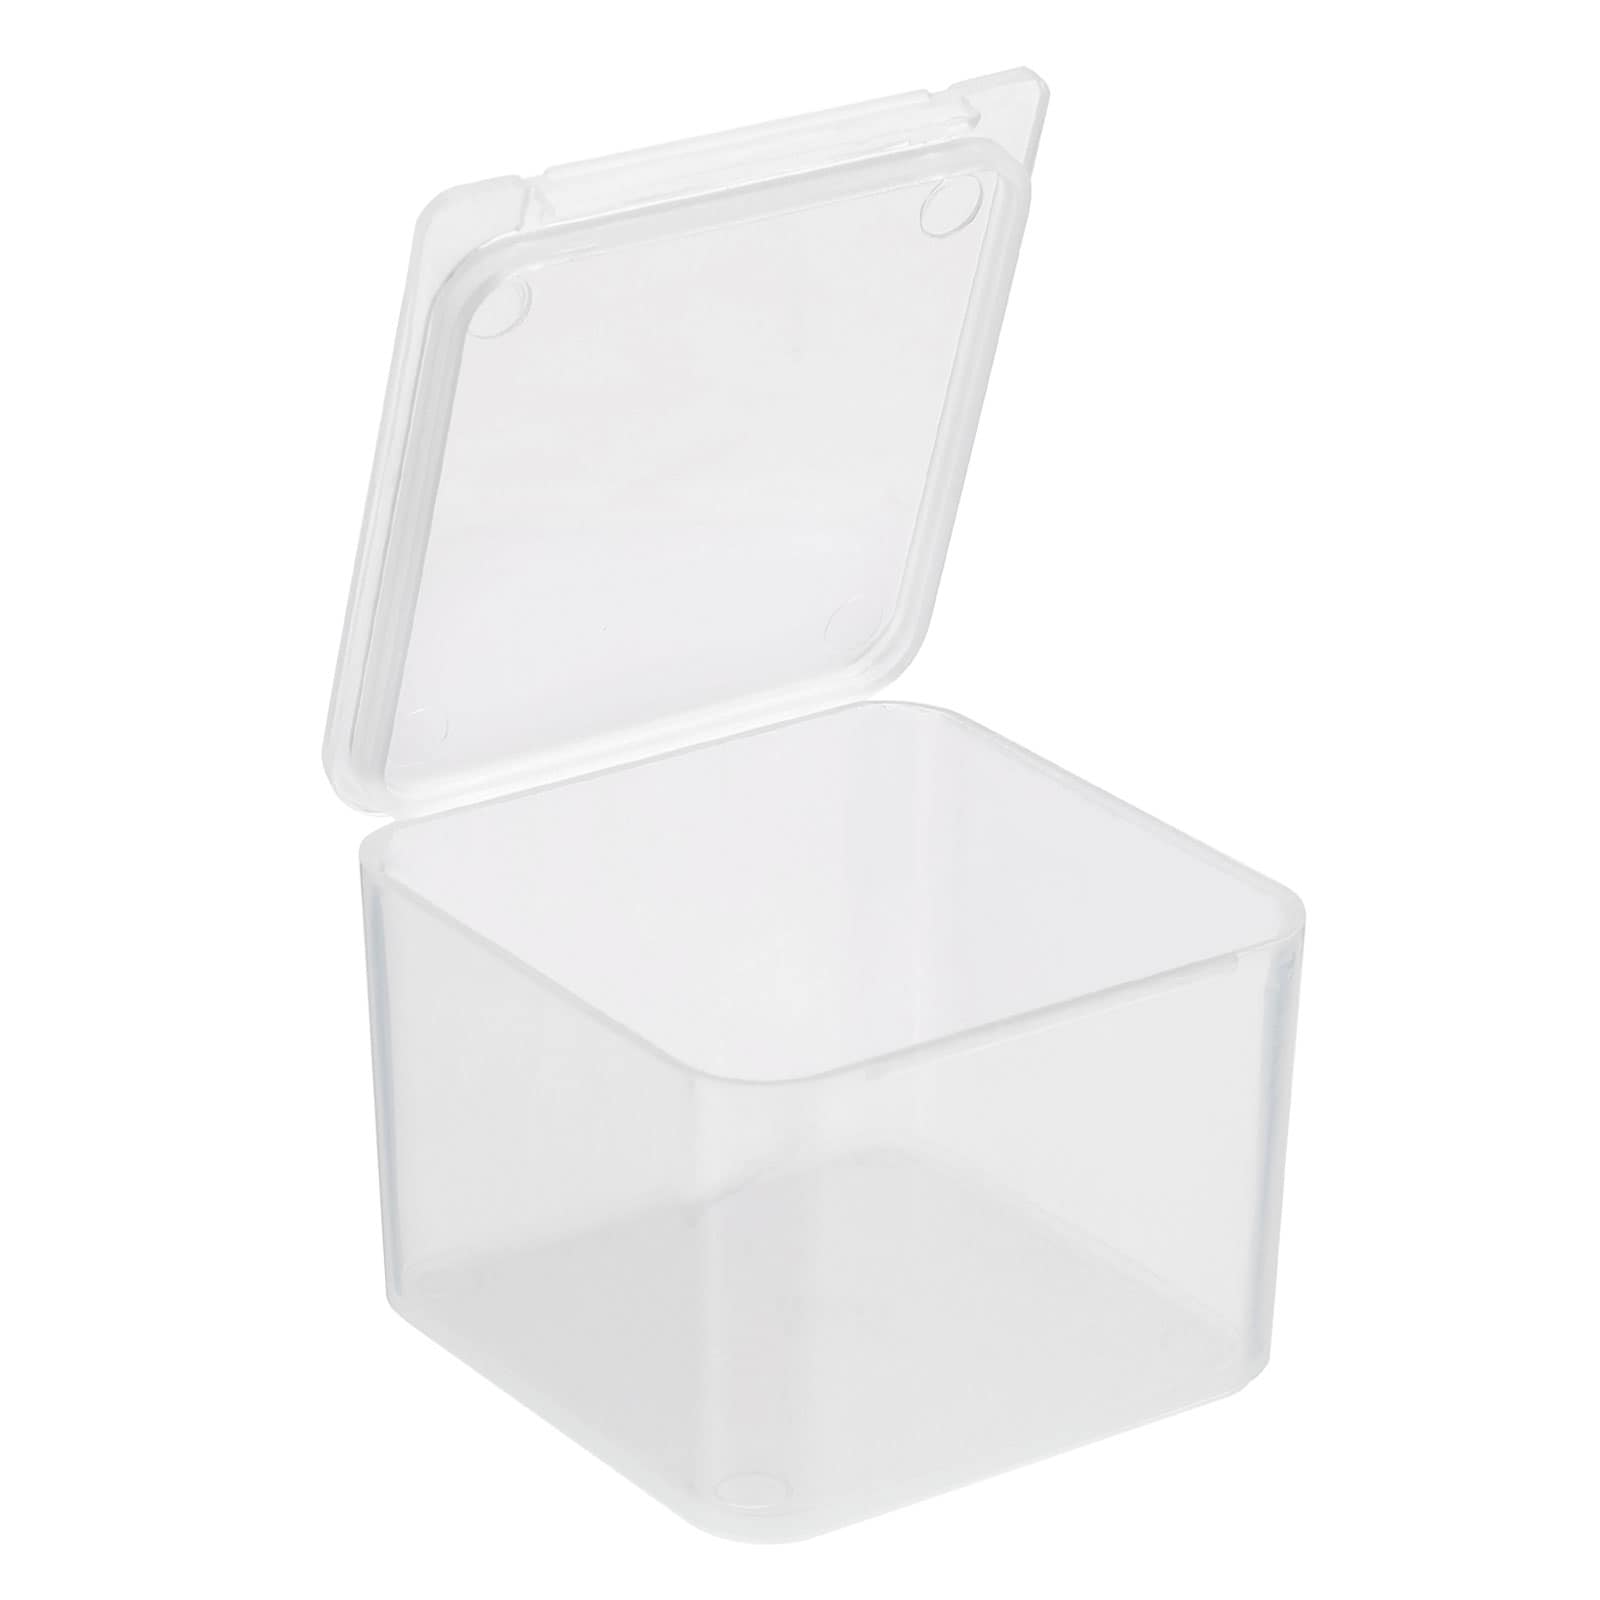 https://ak1.ostkcdn.com/images/products/is/images/direct/3fc8b09cf0a7d03bb3be3b6df43221fc1e4ca1de/12pcs-Clear-Storage-Container-with-Hinged-Lid-40x28mm-Plastic-Square-Craft-Box.jpg